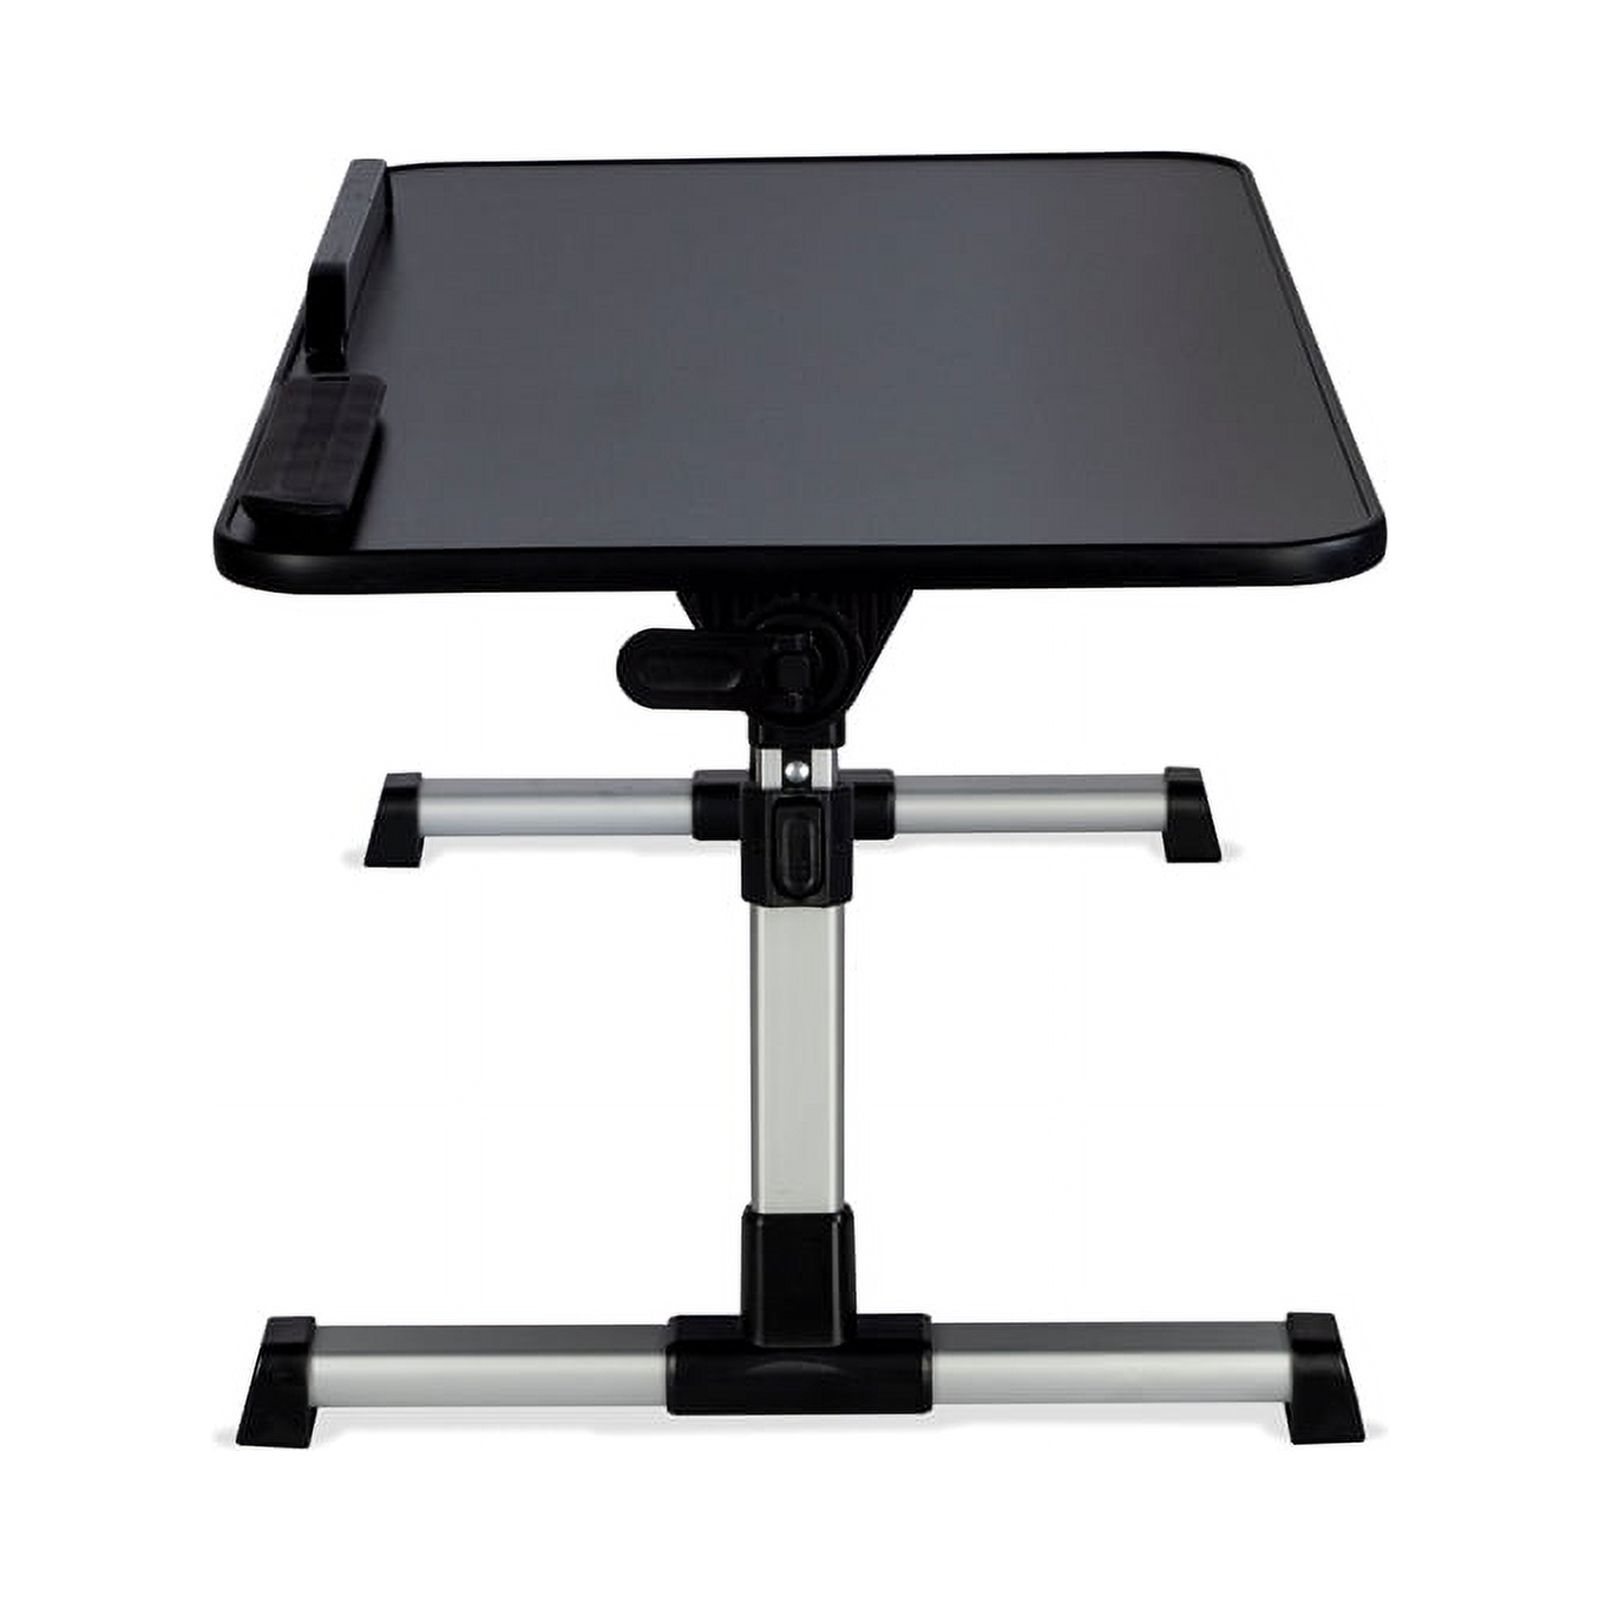 Atlantic Portable Laptop Tray Table with Adjustablt Height and Tilt, Fits Laptops up to 20", Black - image 3 of 8